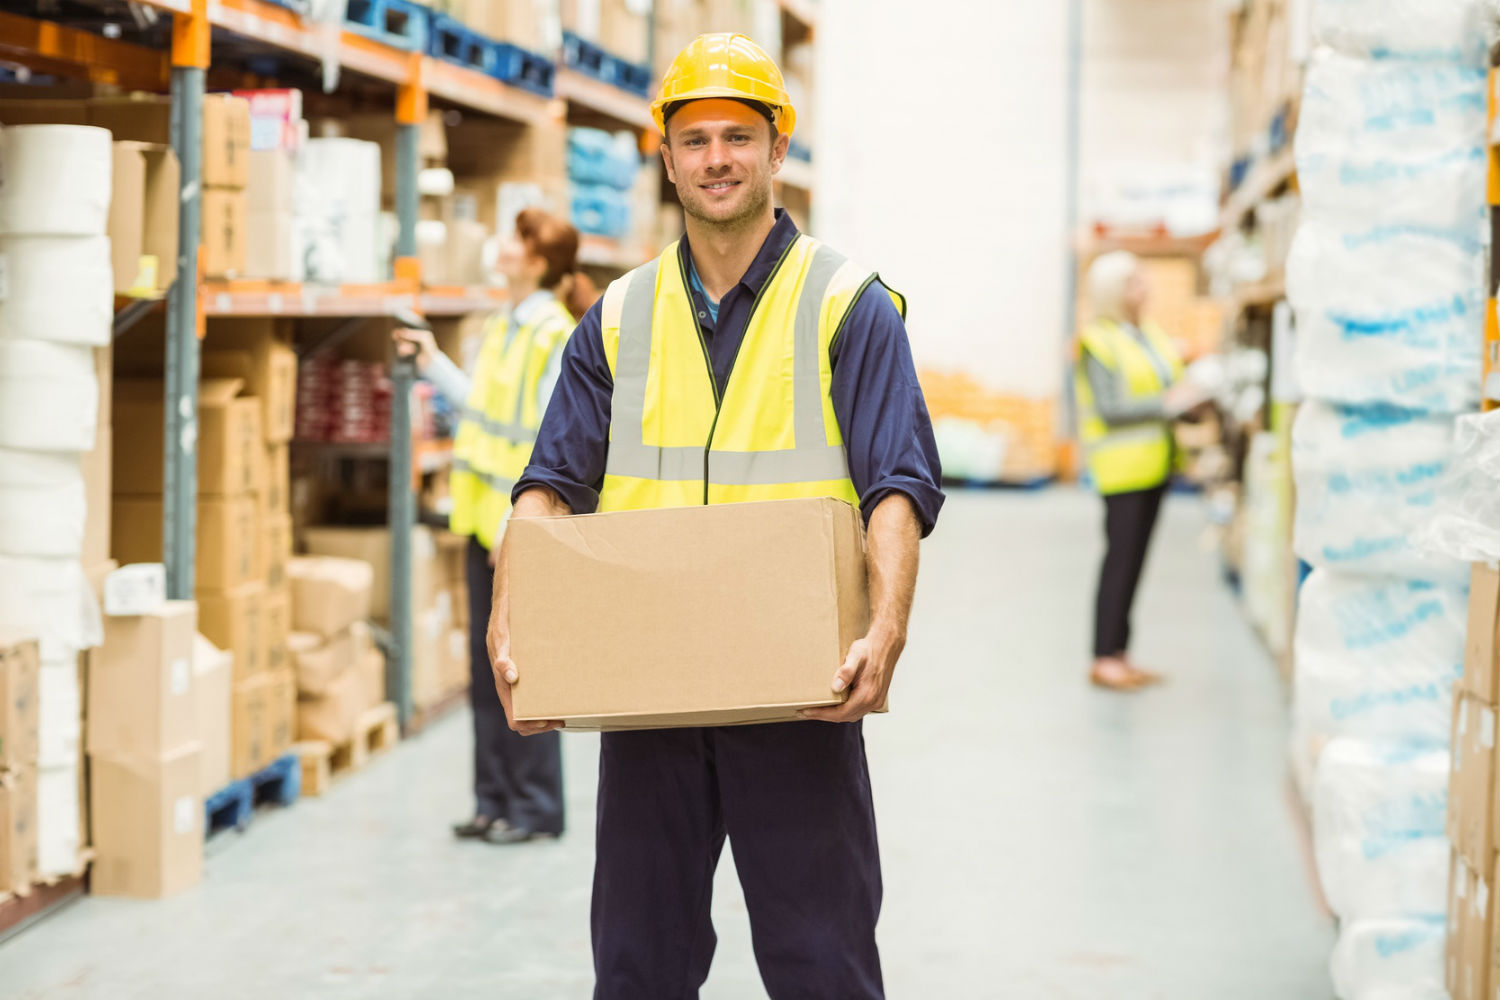 Euro Staff Solution Warehouse workers – United Kingdom (self-employed)